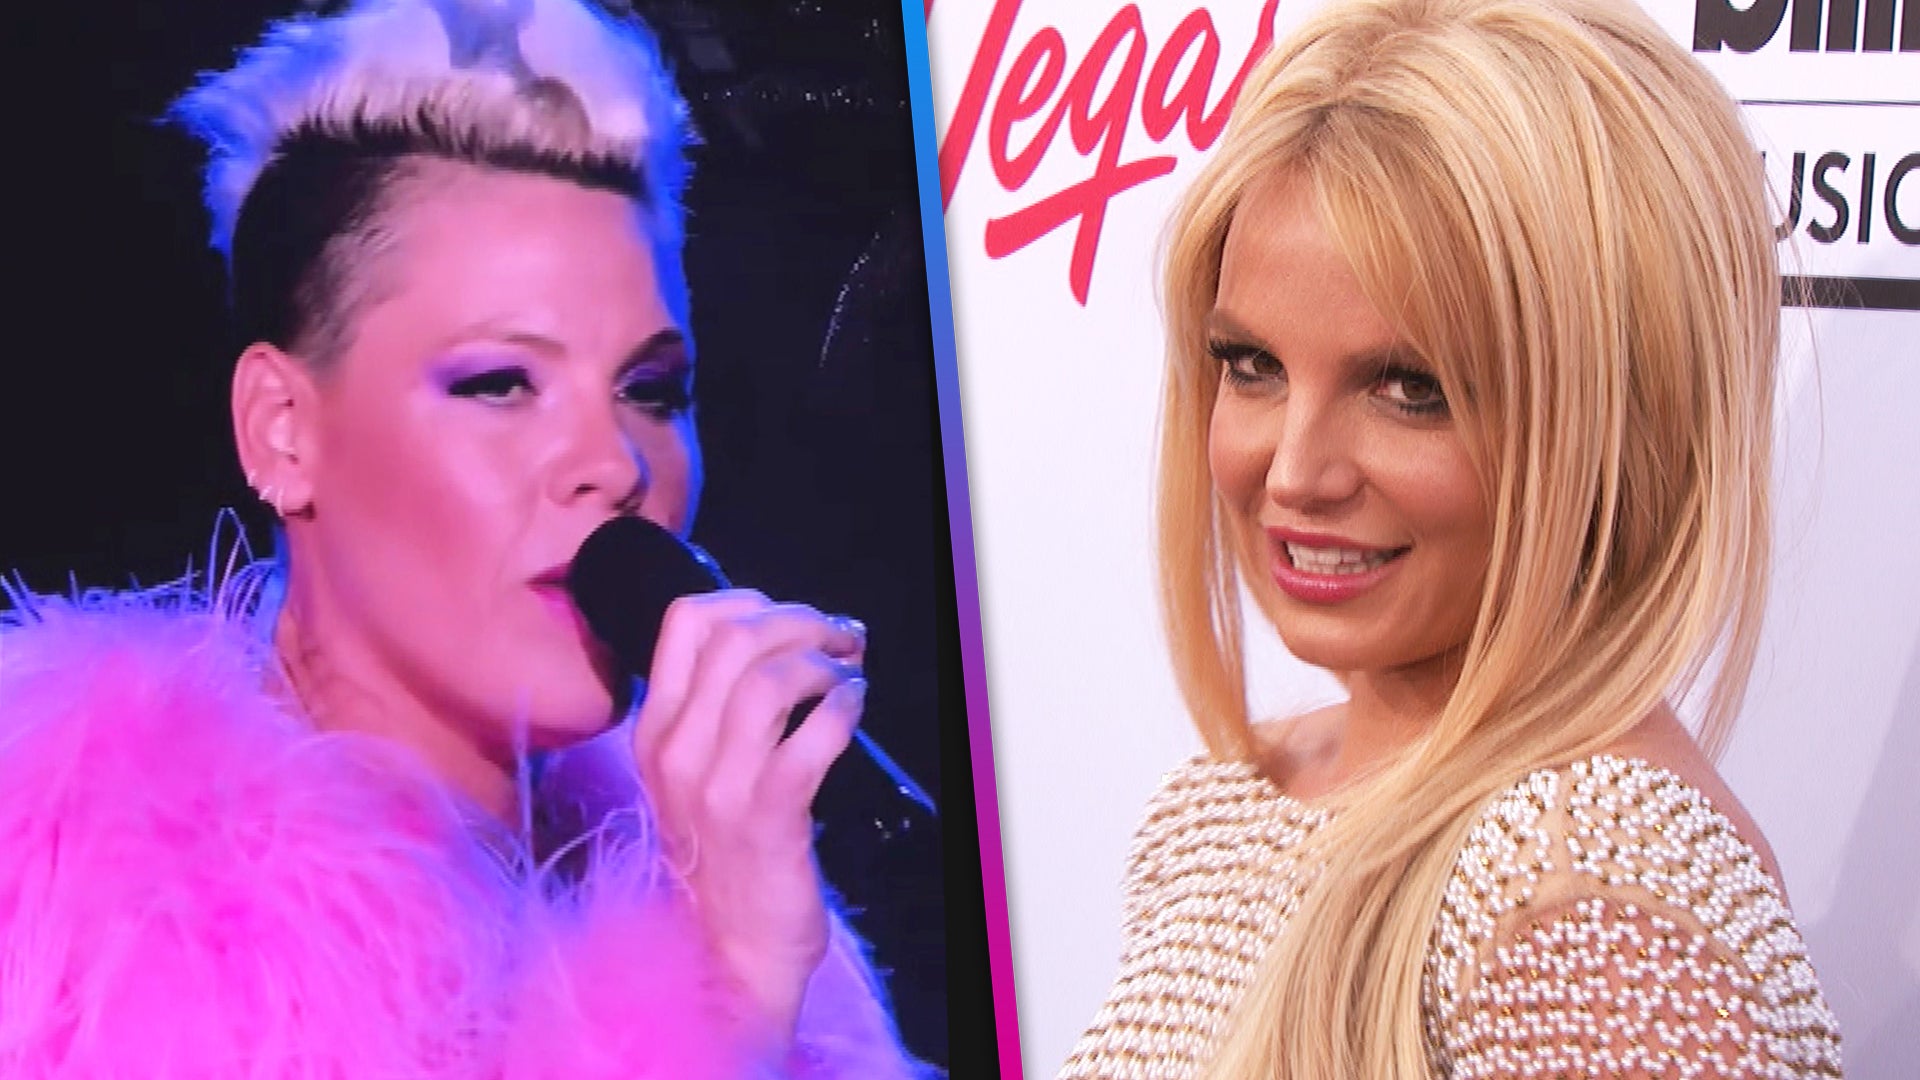 Pink changes lyrics in support of 'sweet' Britney Spears - Los